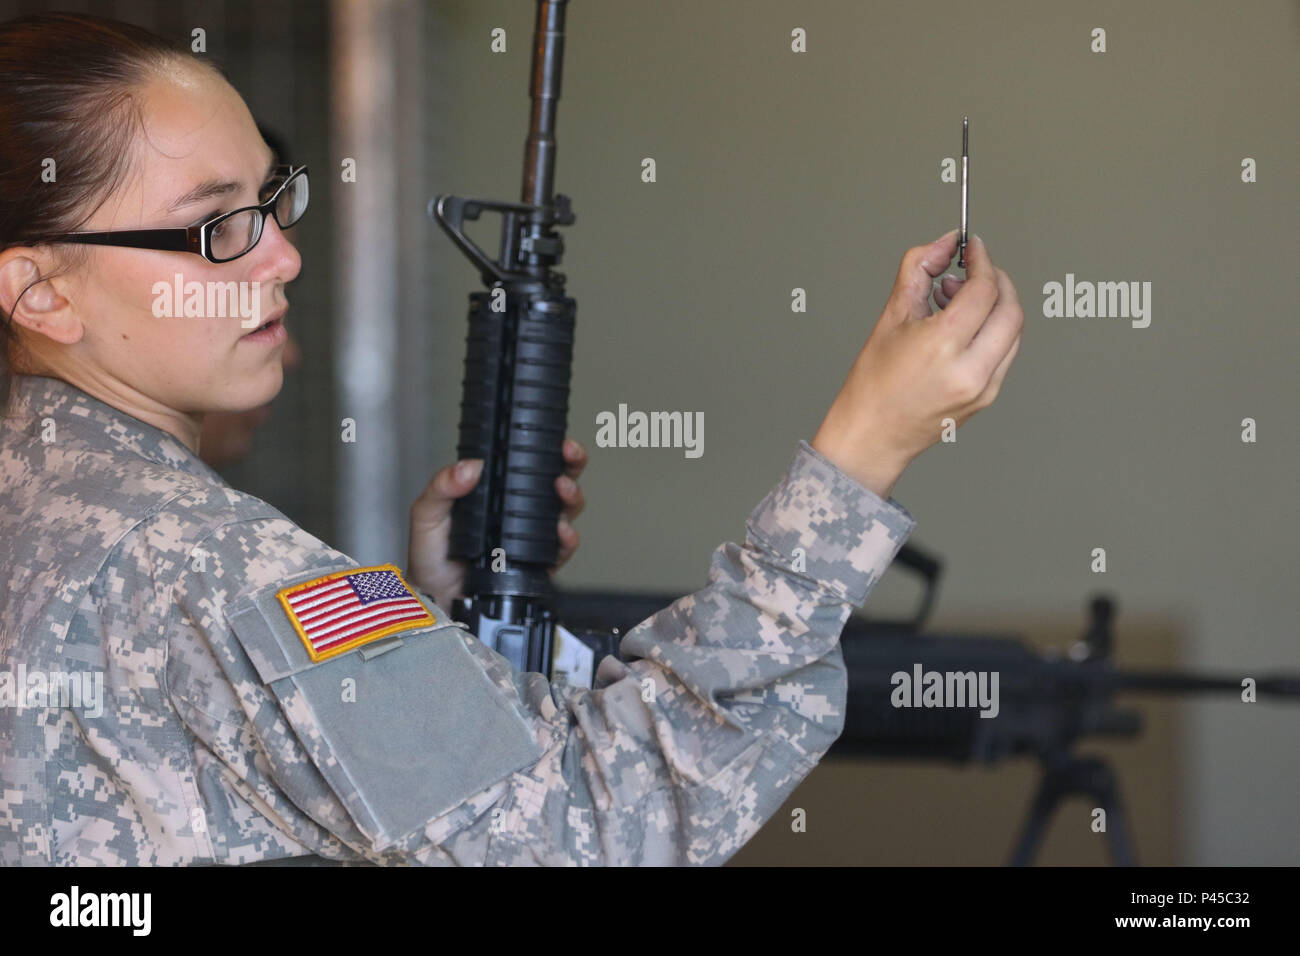 Arizona Army National Guard Sgt. Rachel H. Mick, a small-arms repairer with the 3666th Support Maintenance Company, inspects the firing pin on an M4 carbine, June 22, at Fort Greely, Alaska, which is located approximately 100 miles southeast of Fairbanks, Alaska. Mick was part of a mobile repair team from the Arizona Guard that inspected nearly 600 weapons for the Alaska National Guard’s 49th Missile Defense Battalion. (Arizona Army National Guard photo by Staff Sgt. Brian A. Barbour) Stock Photo